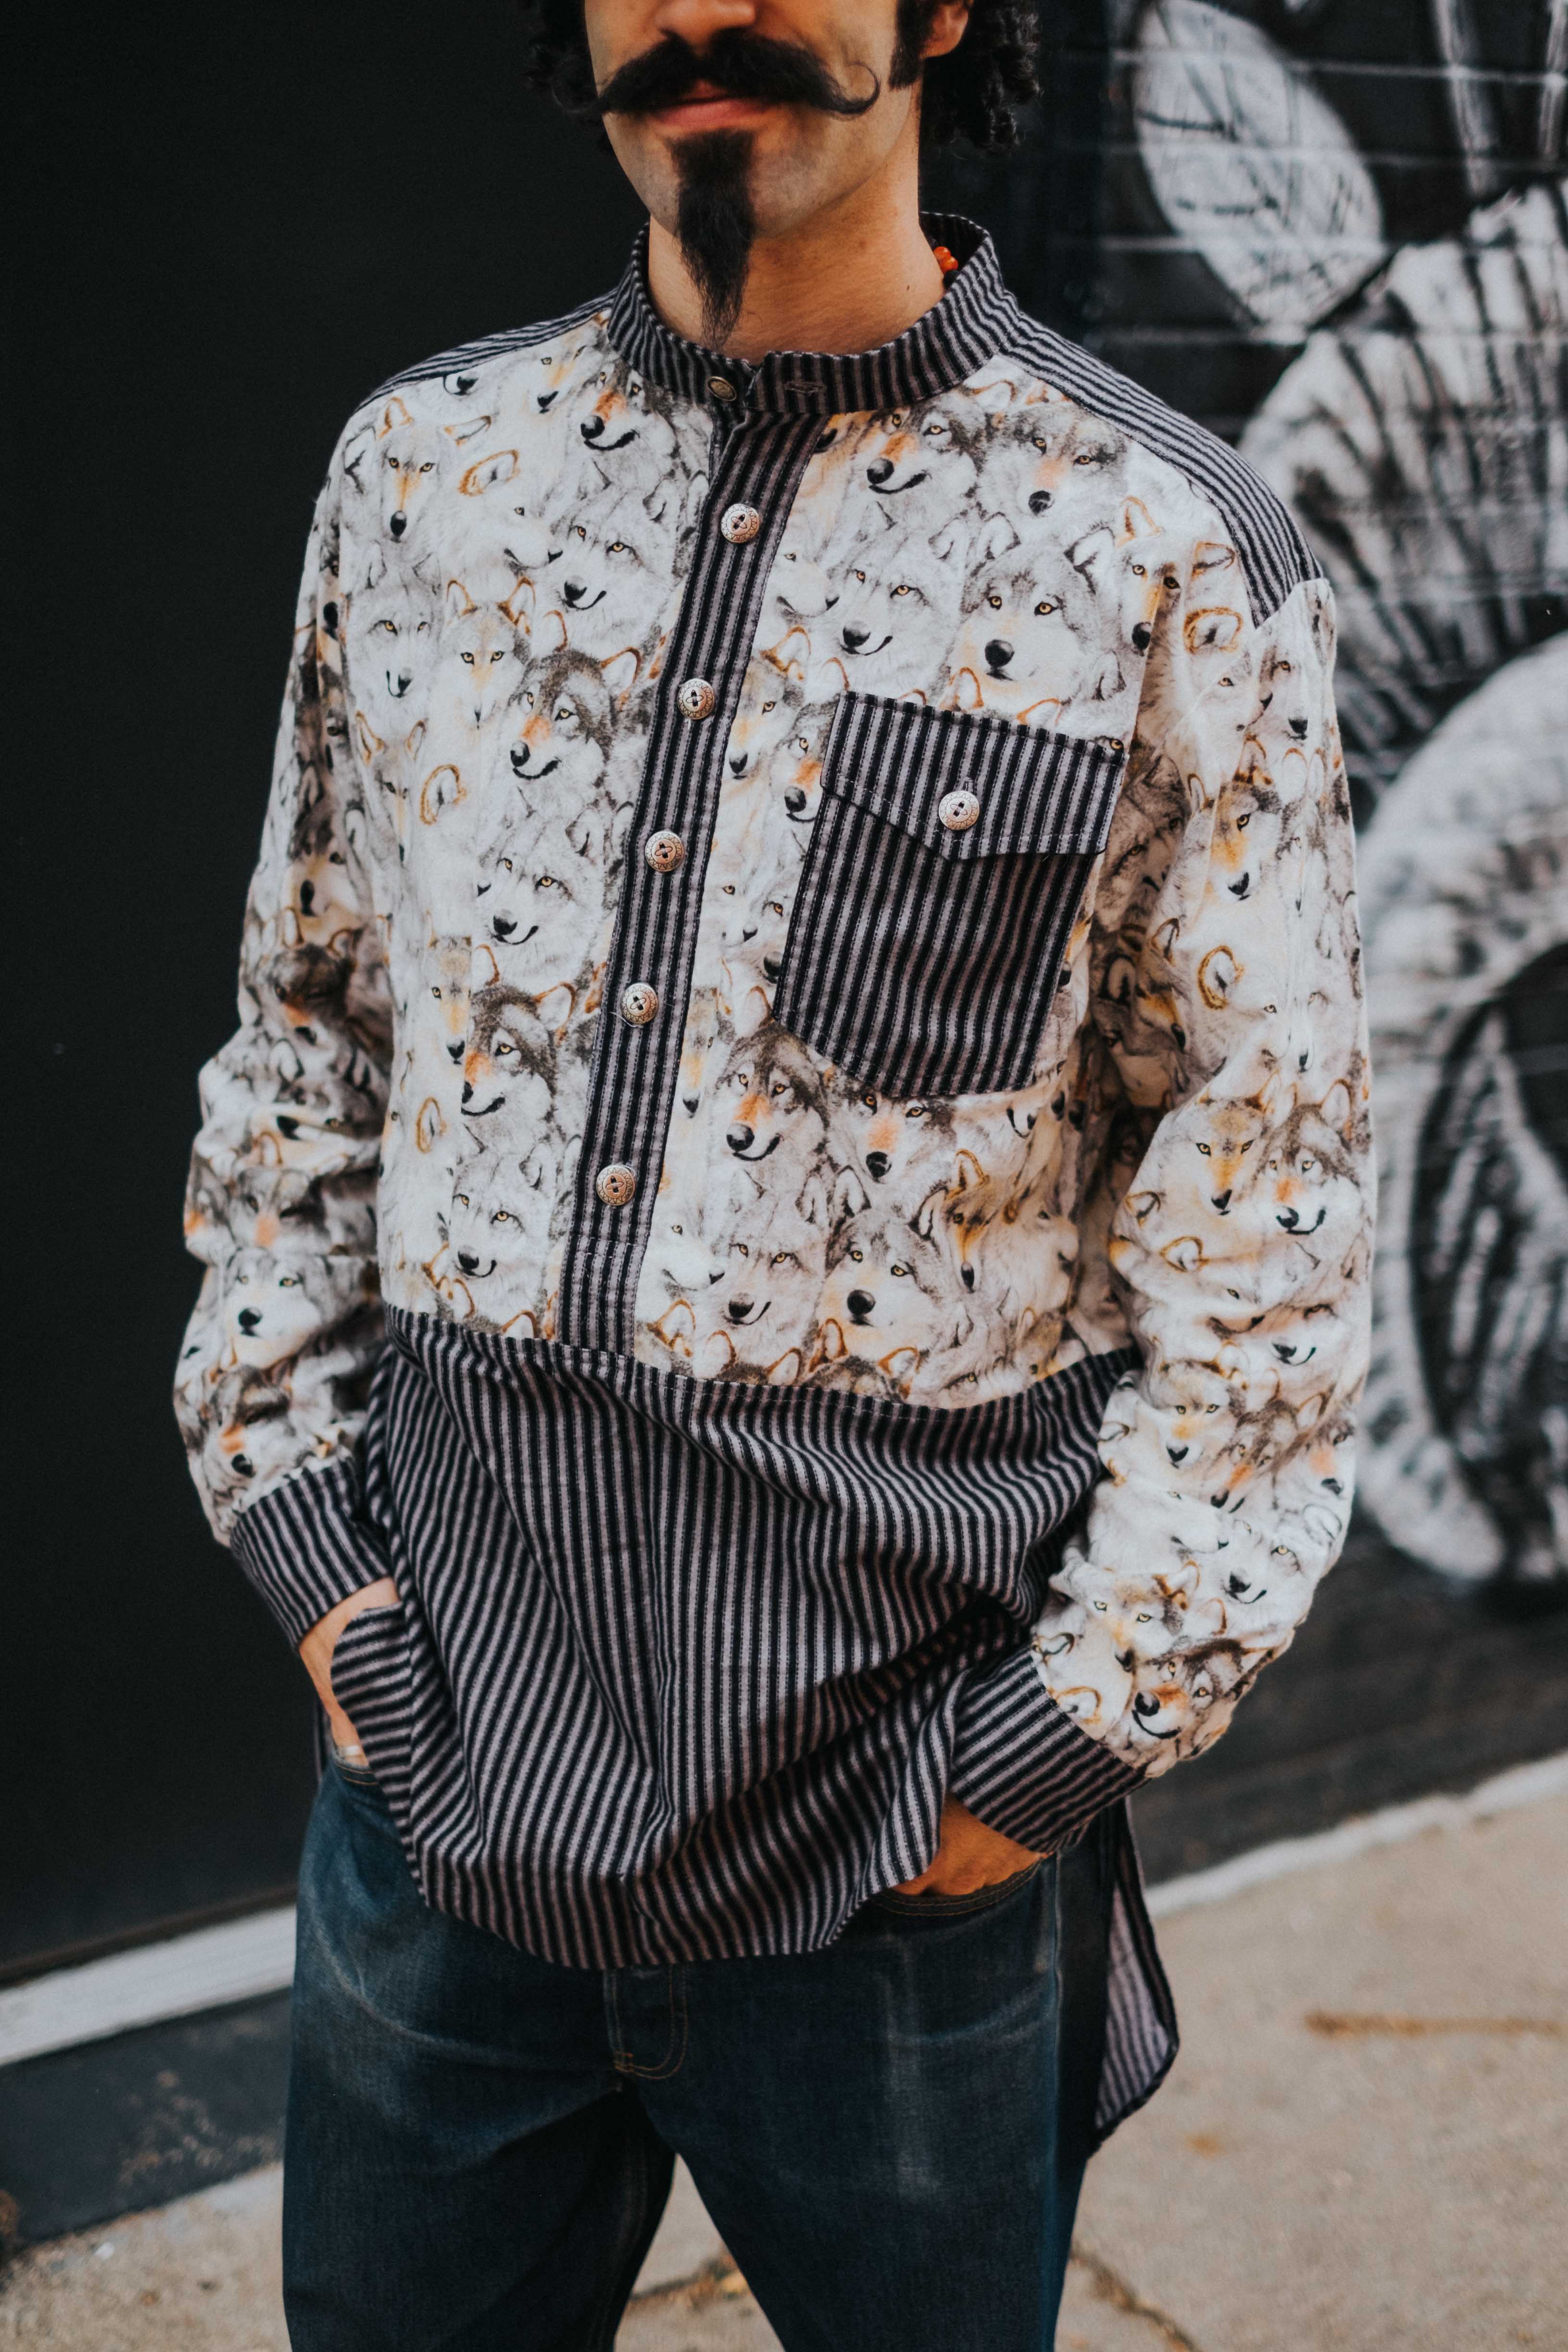 303 Style Profile - Marcus Goodgaine and His Brilliant Homemade Shirts ...